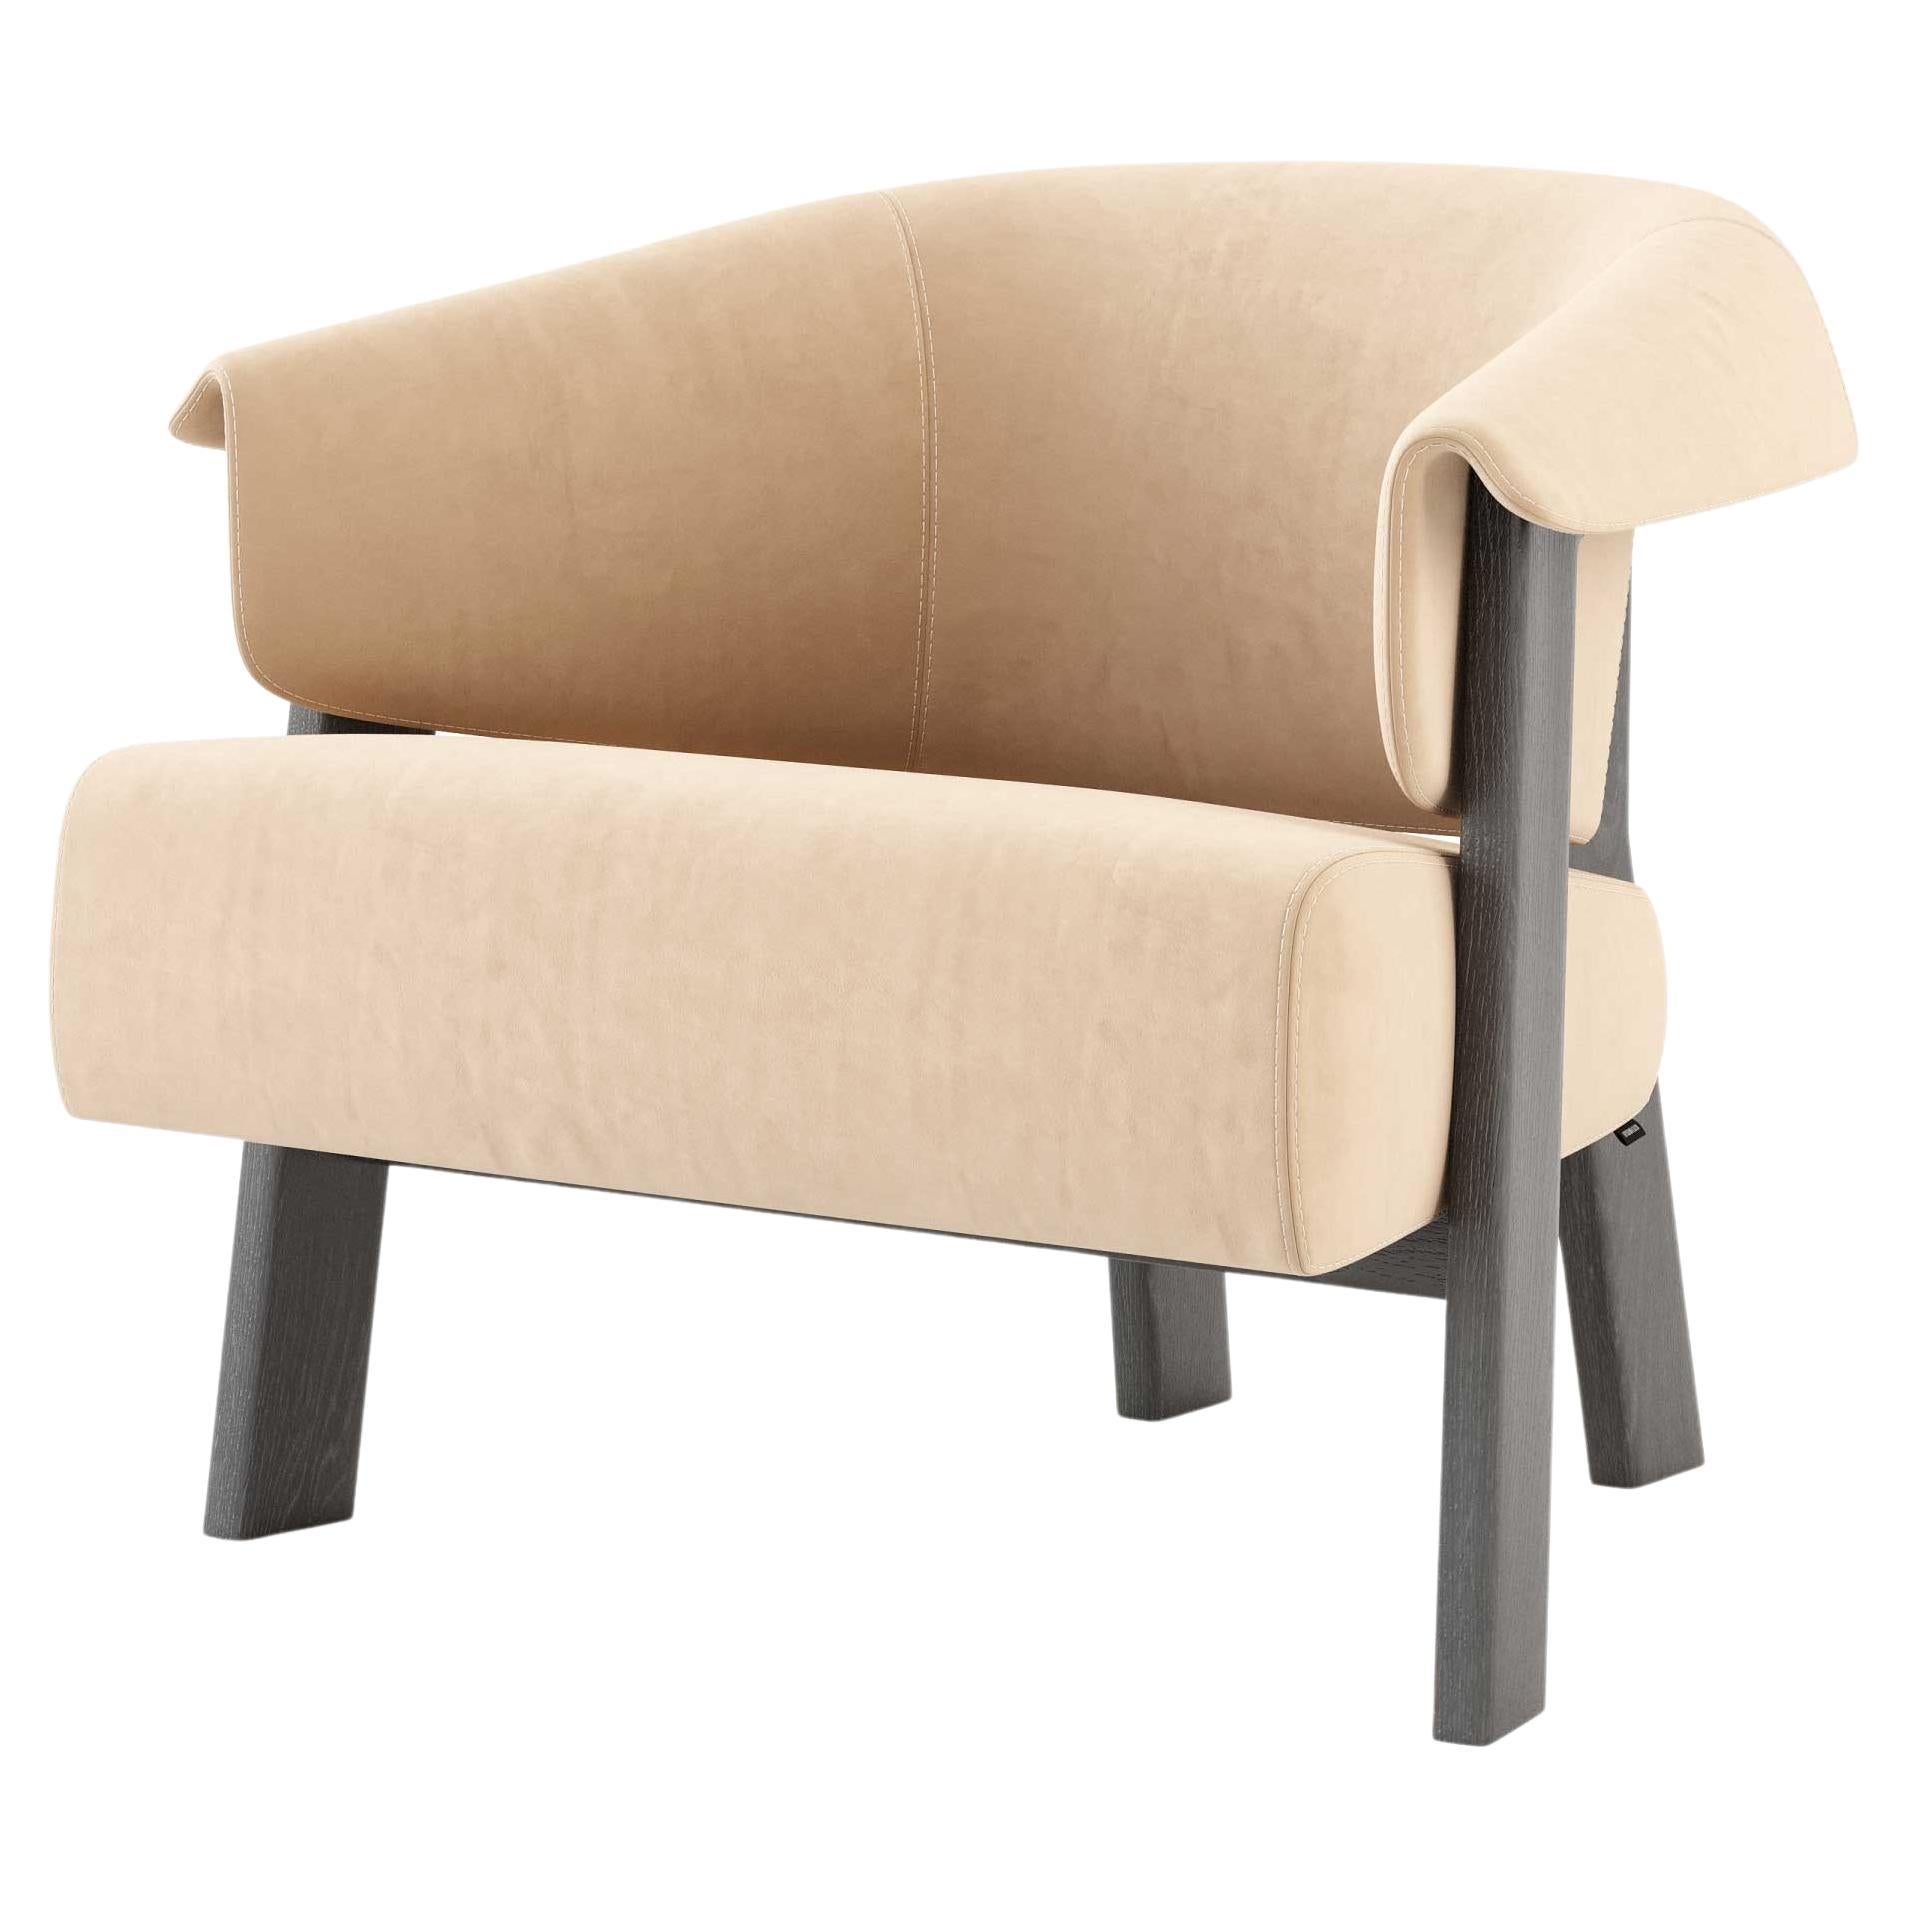 Modern Toro Armchair made with oak and suede, Handmade by Stylish Club For Sale